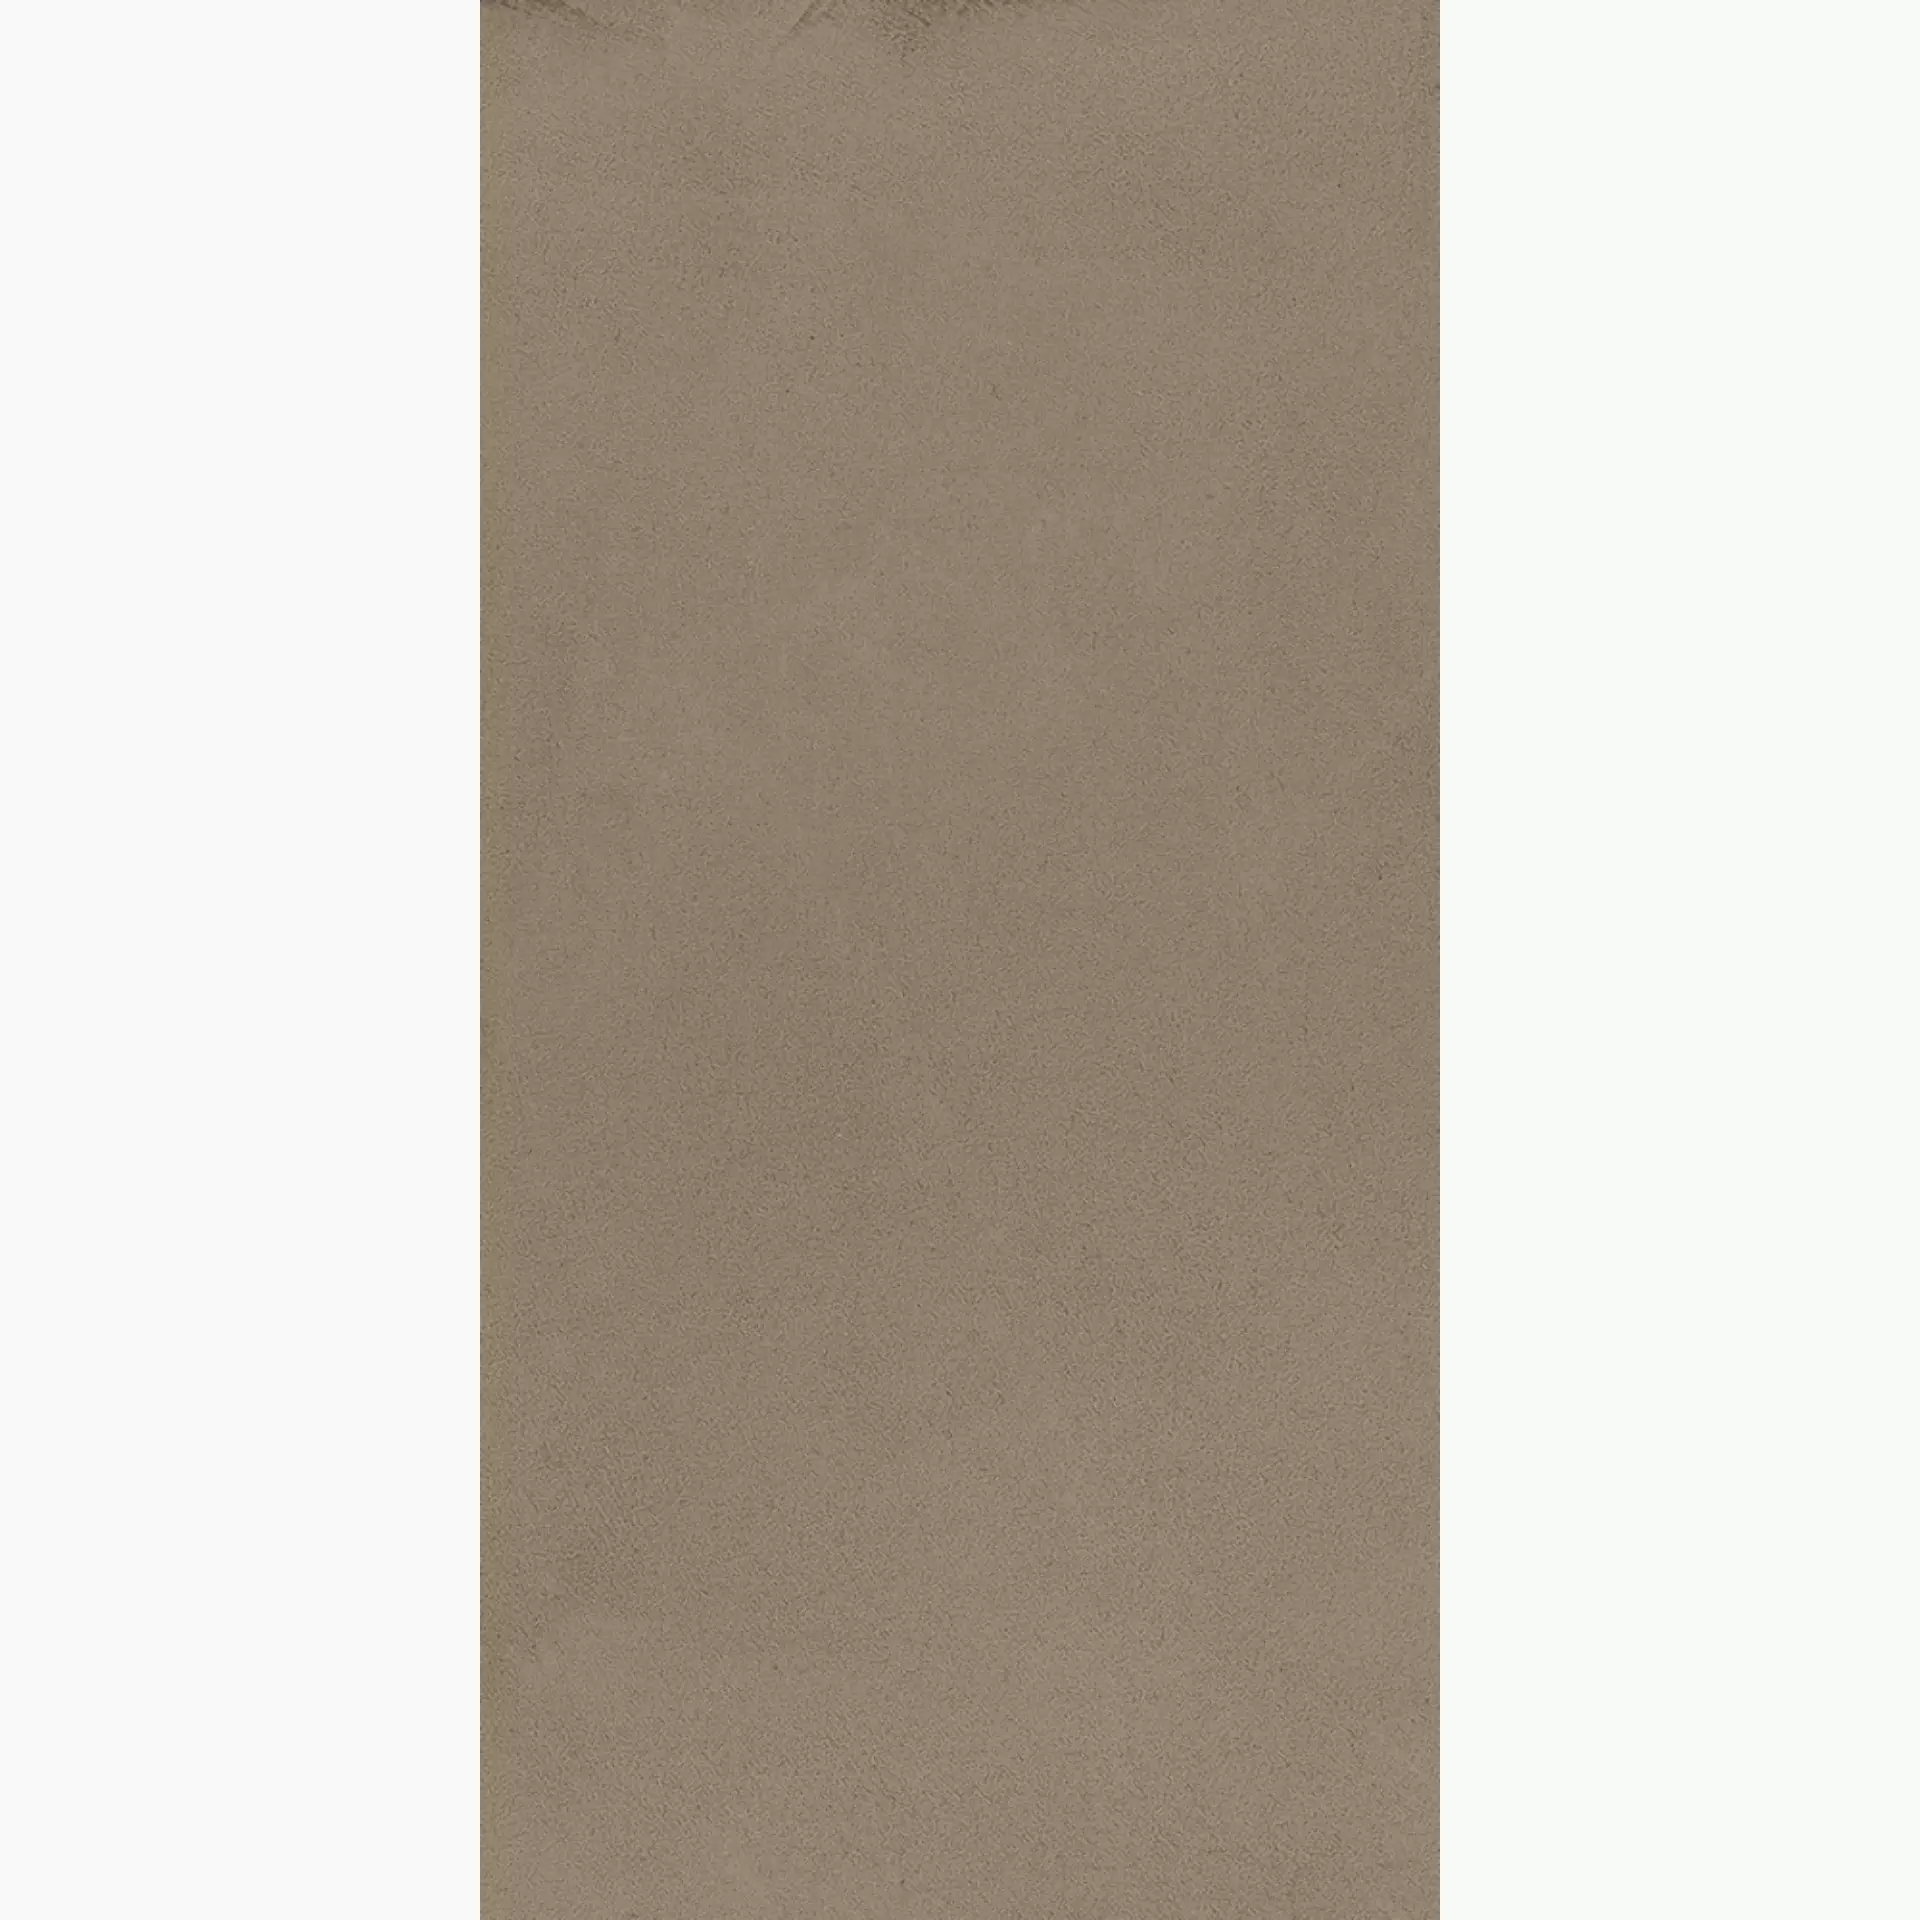 Mirage Clay Cl 07 Trust Naturale Stair plate A ARS0 30x60cm 9mm